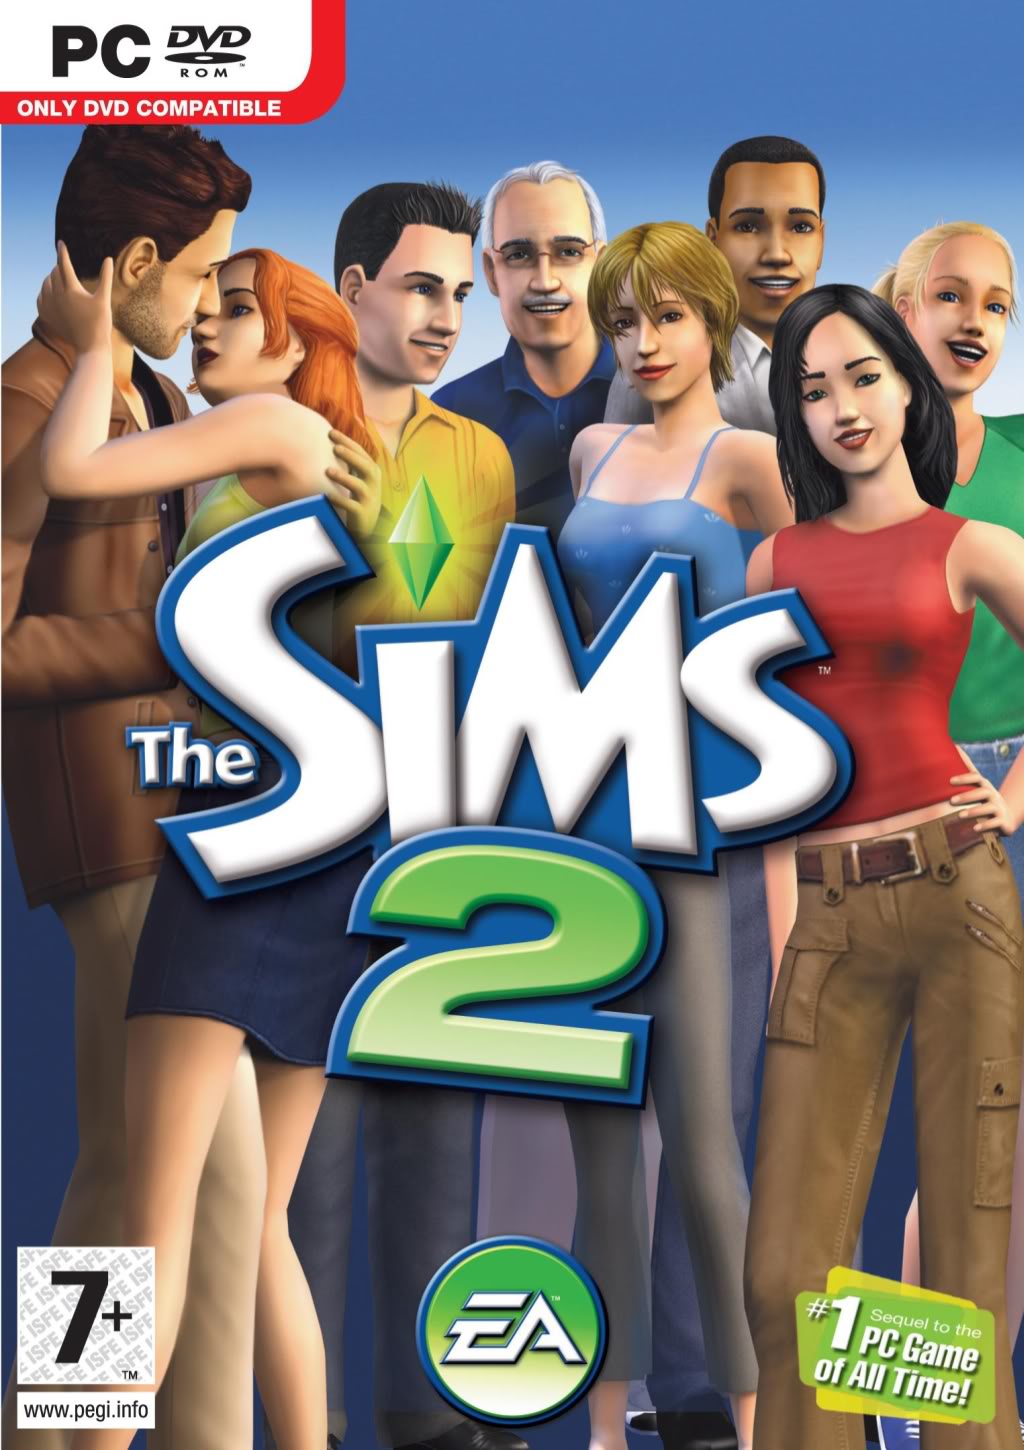 sims download for pc